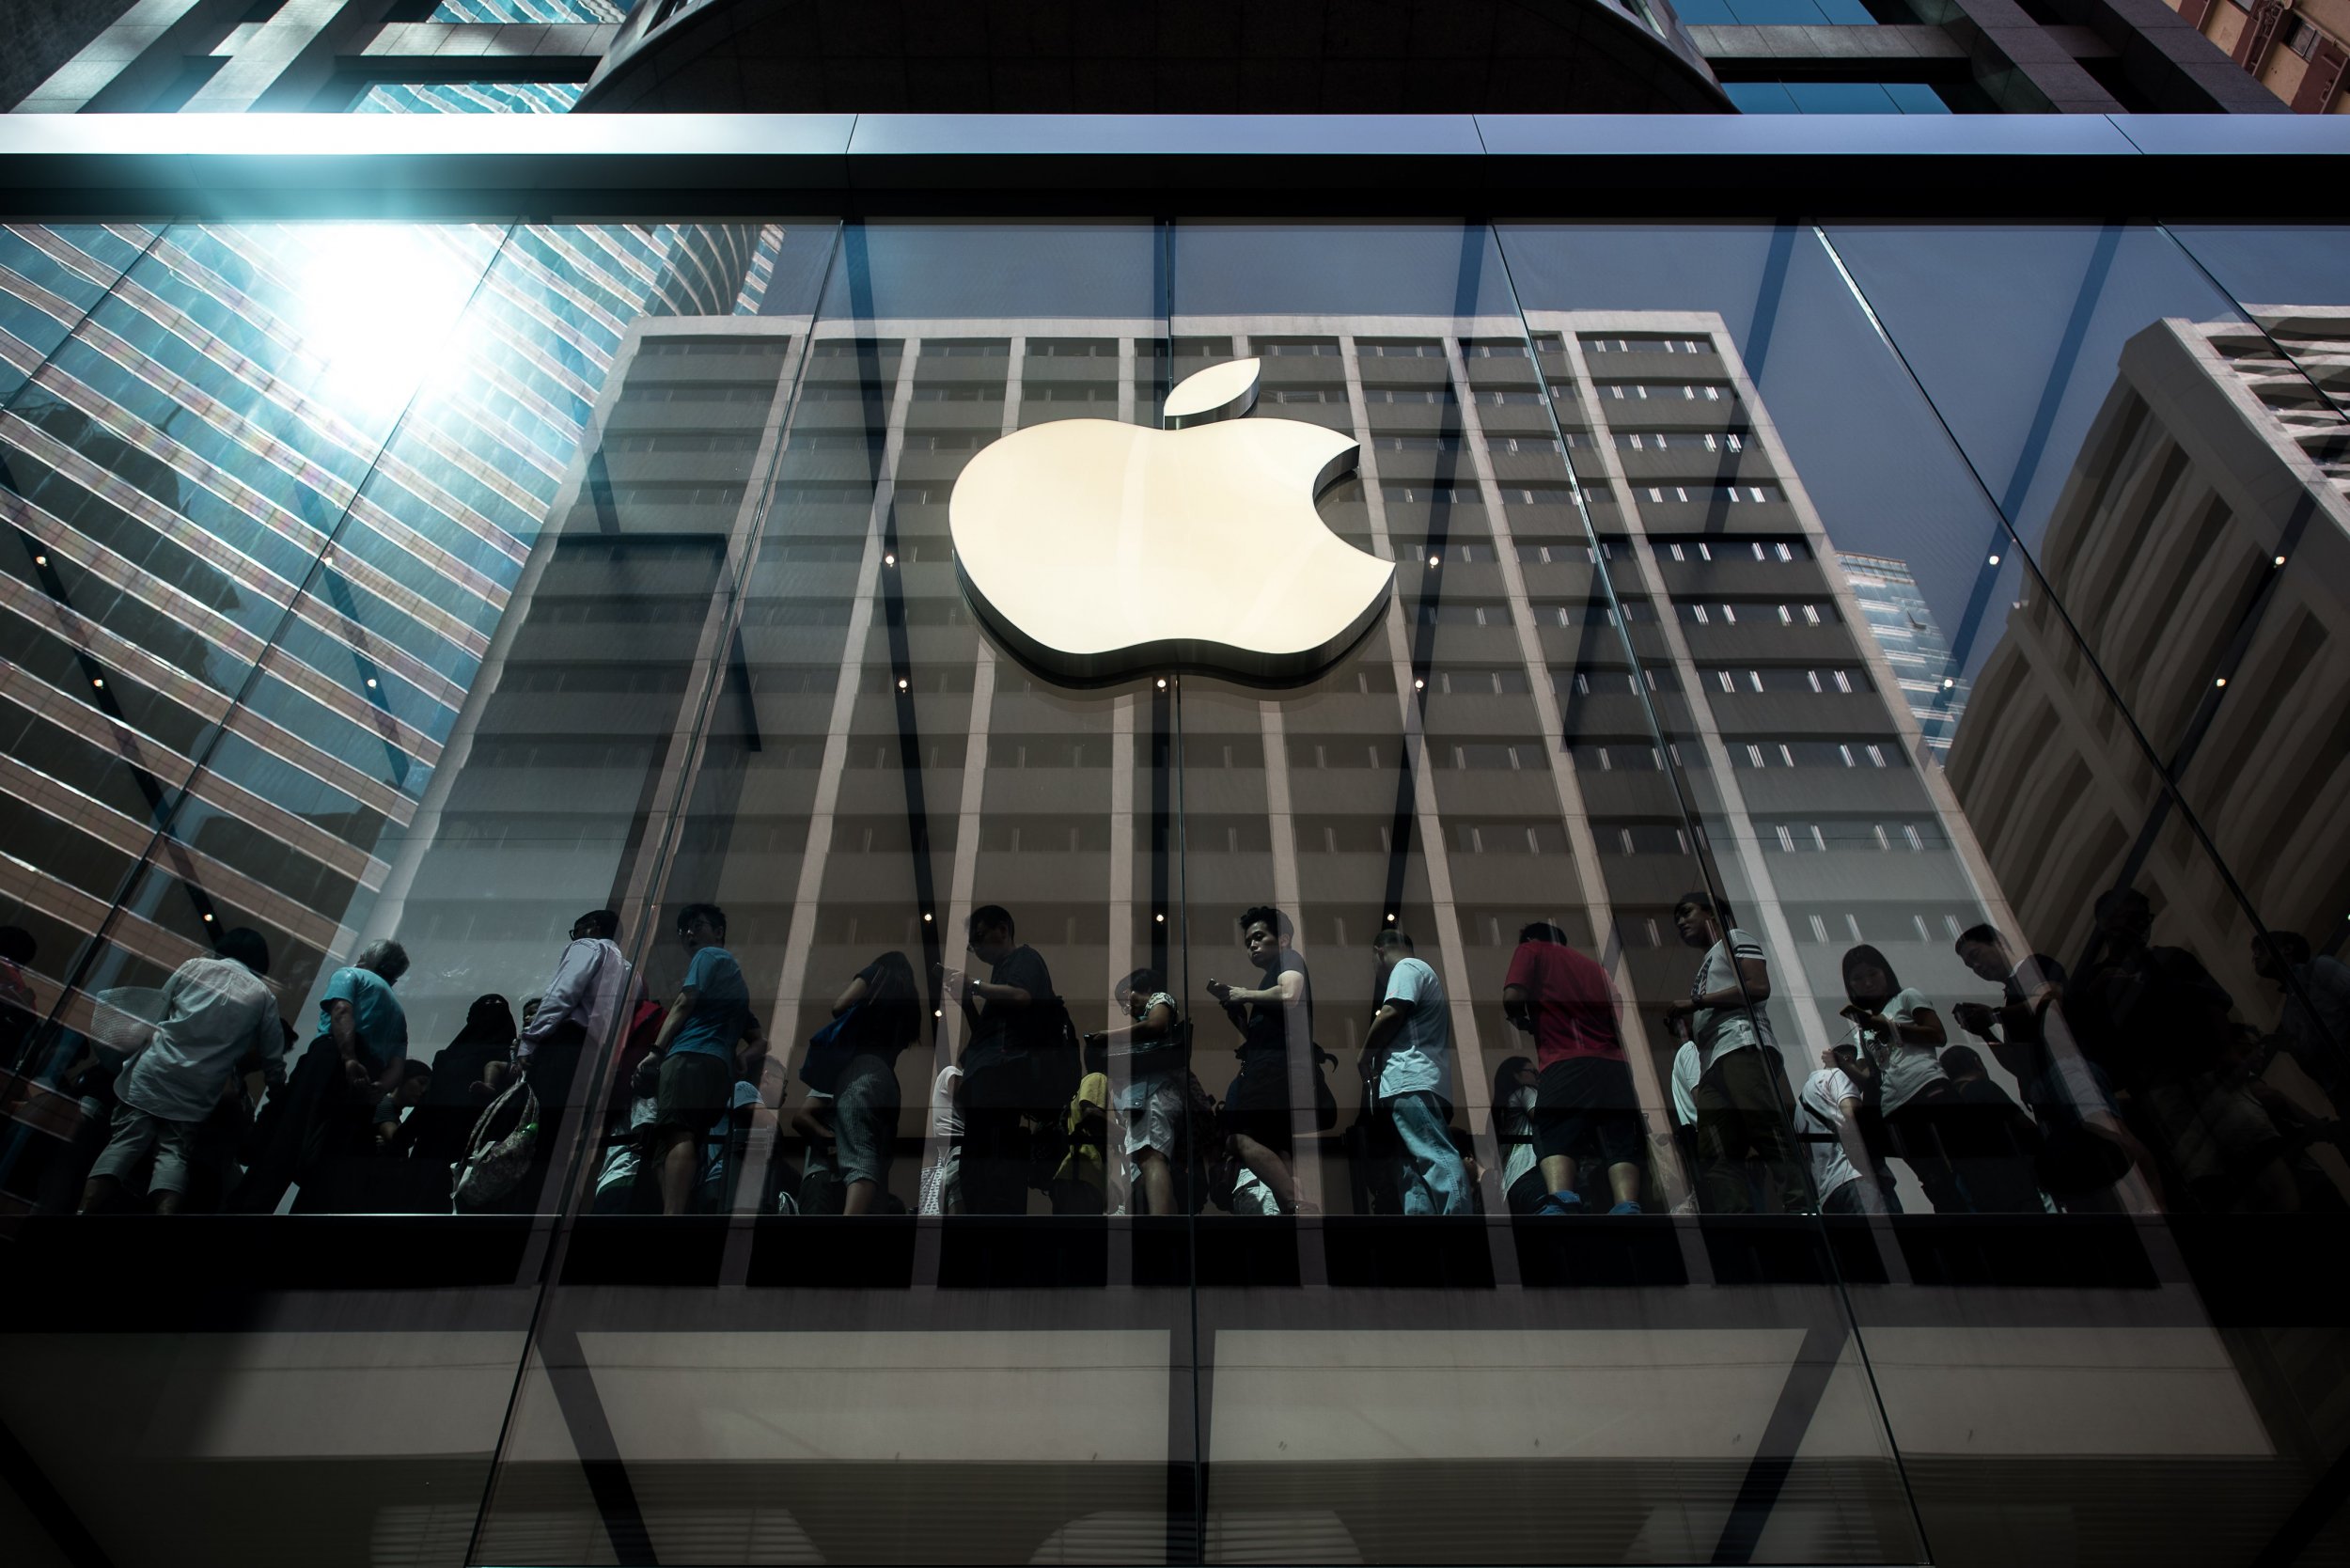 Apple Faces Legal Setback U.S. Board Finds Store Workers Unfairly Questioned in NYC---